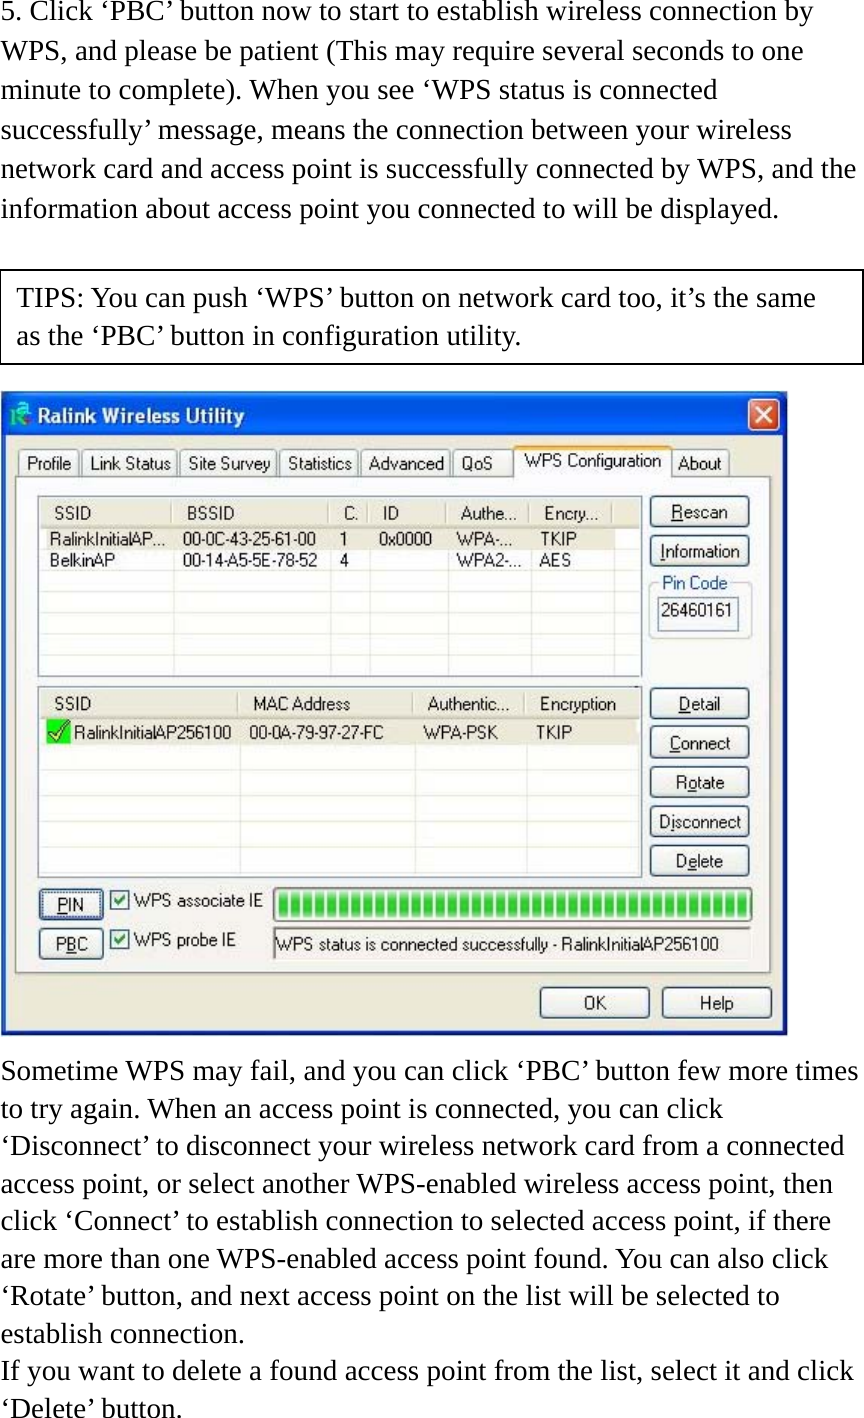 5. Click ‘PBC’ button now to start to establish wireless connection by WPS, and please be patient (This may require several seconds to one minute to complete). When you see ‘WPS status is connected successfully’ message, means the connection between your wireless network card and access point is successfully connected by WPS, and the information about access point you connected to will be displayed.      Sometime WPS may fail, and you can click ‘PBC’ button few more times to try again. When an access point is connected, you can click ‘Disconnect’ to disconnect your wireless network card from a connected access point, or select another WPS-enabled wireless access point, then click ‘Connect’ to establish connection to selected access point, if there are more than one WPS-enabled access point found. You can also click ‘Rotate’ button, and next access point on the list will be selected to establish connection. If you want to delete a found access point from the list, select it and click ‘Delete’ button.   TIPS: You can push ‘WPS’ button on network card too, it’s the same as the ‘PBC’ button in configuration utility. 